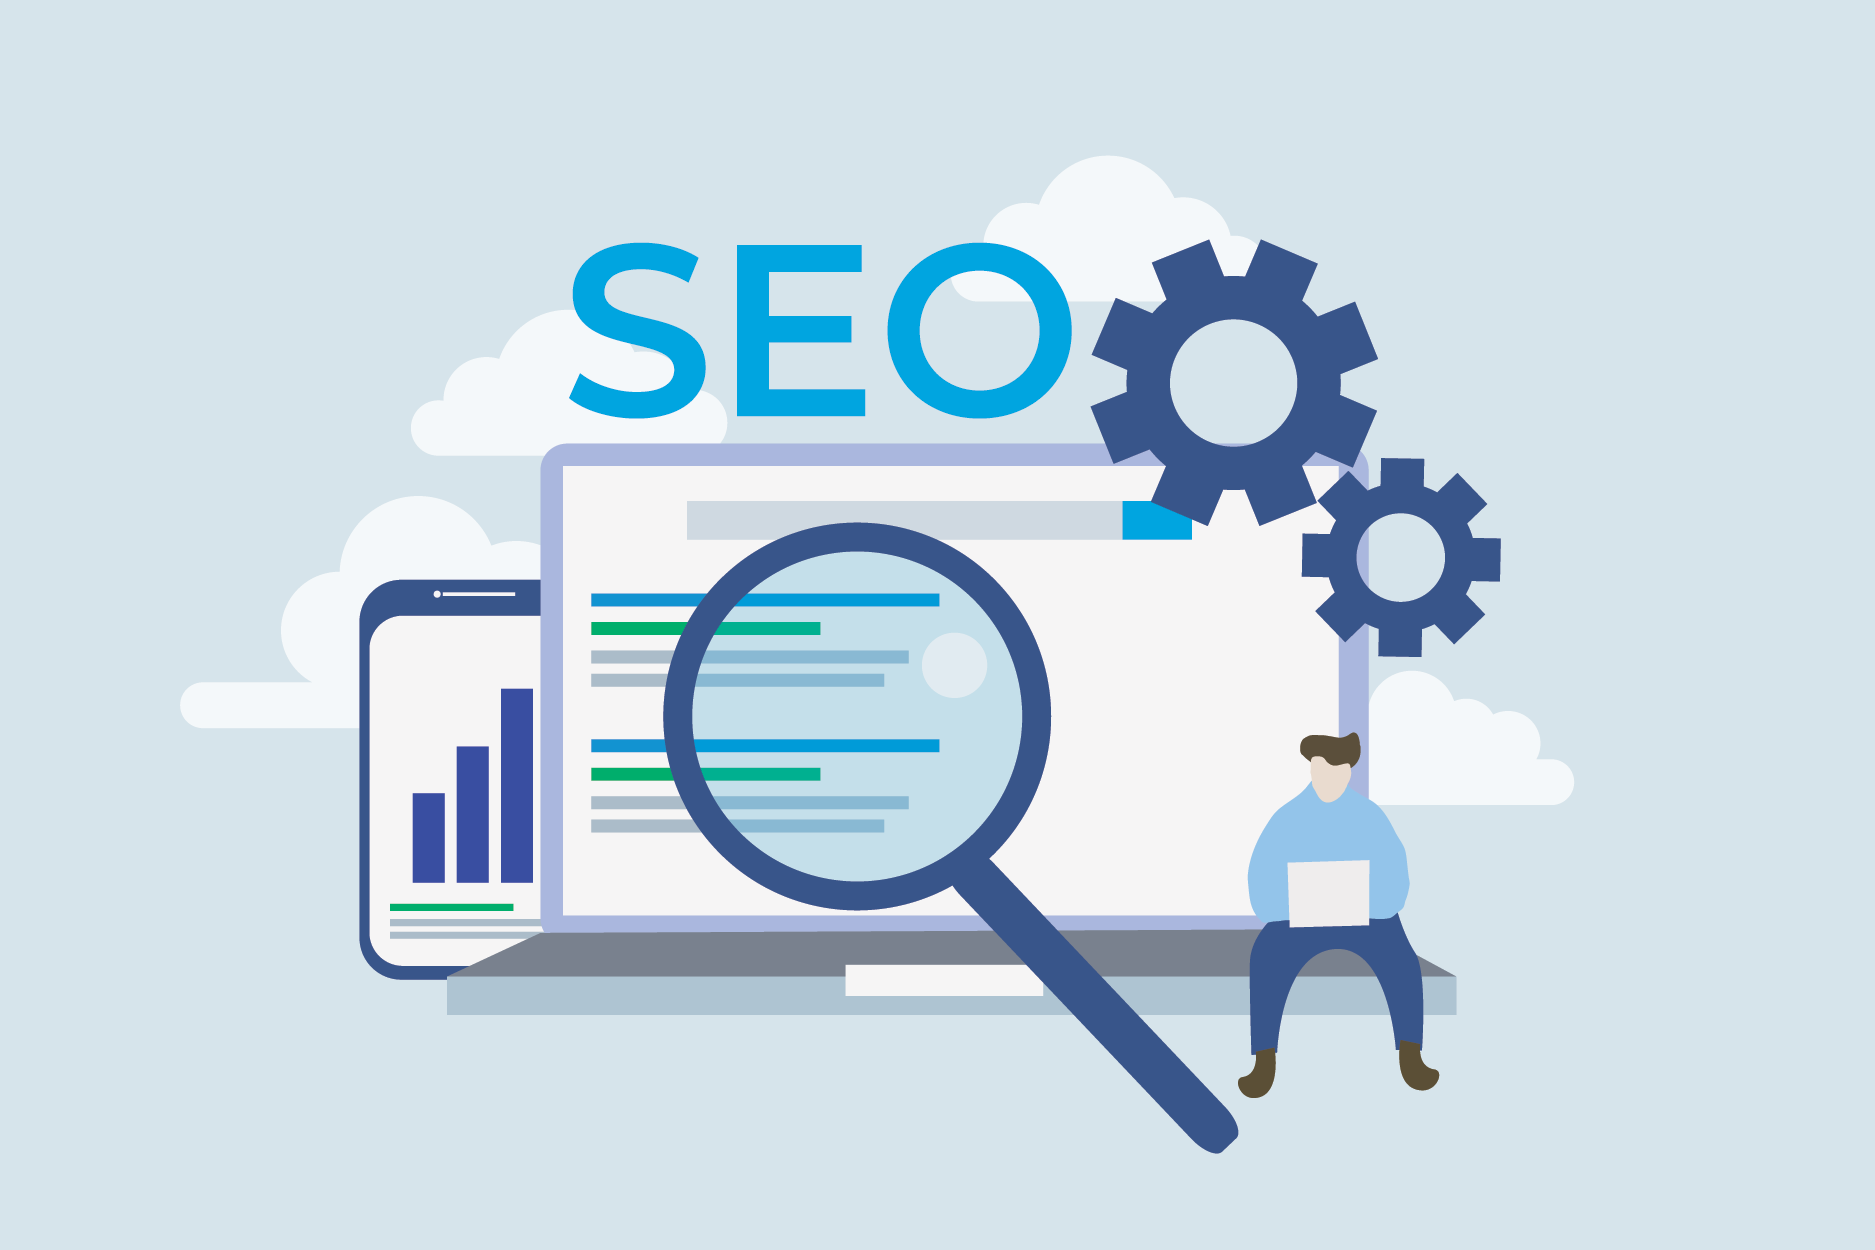 SEO Services: The Complete Guide